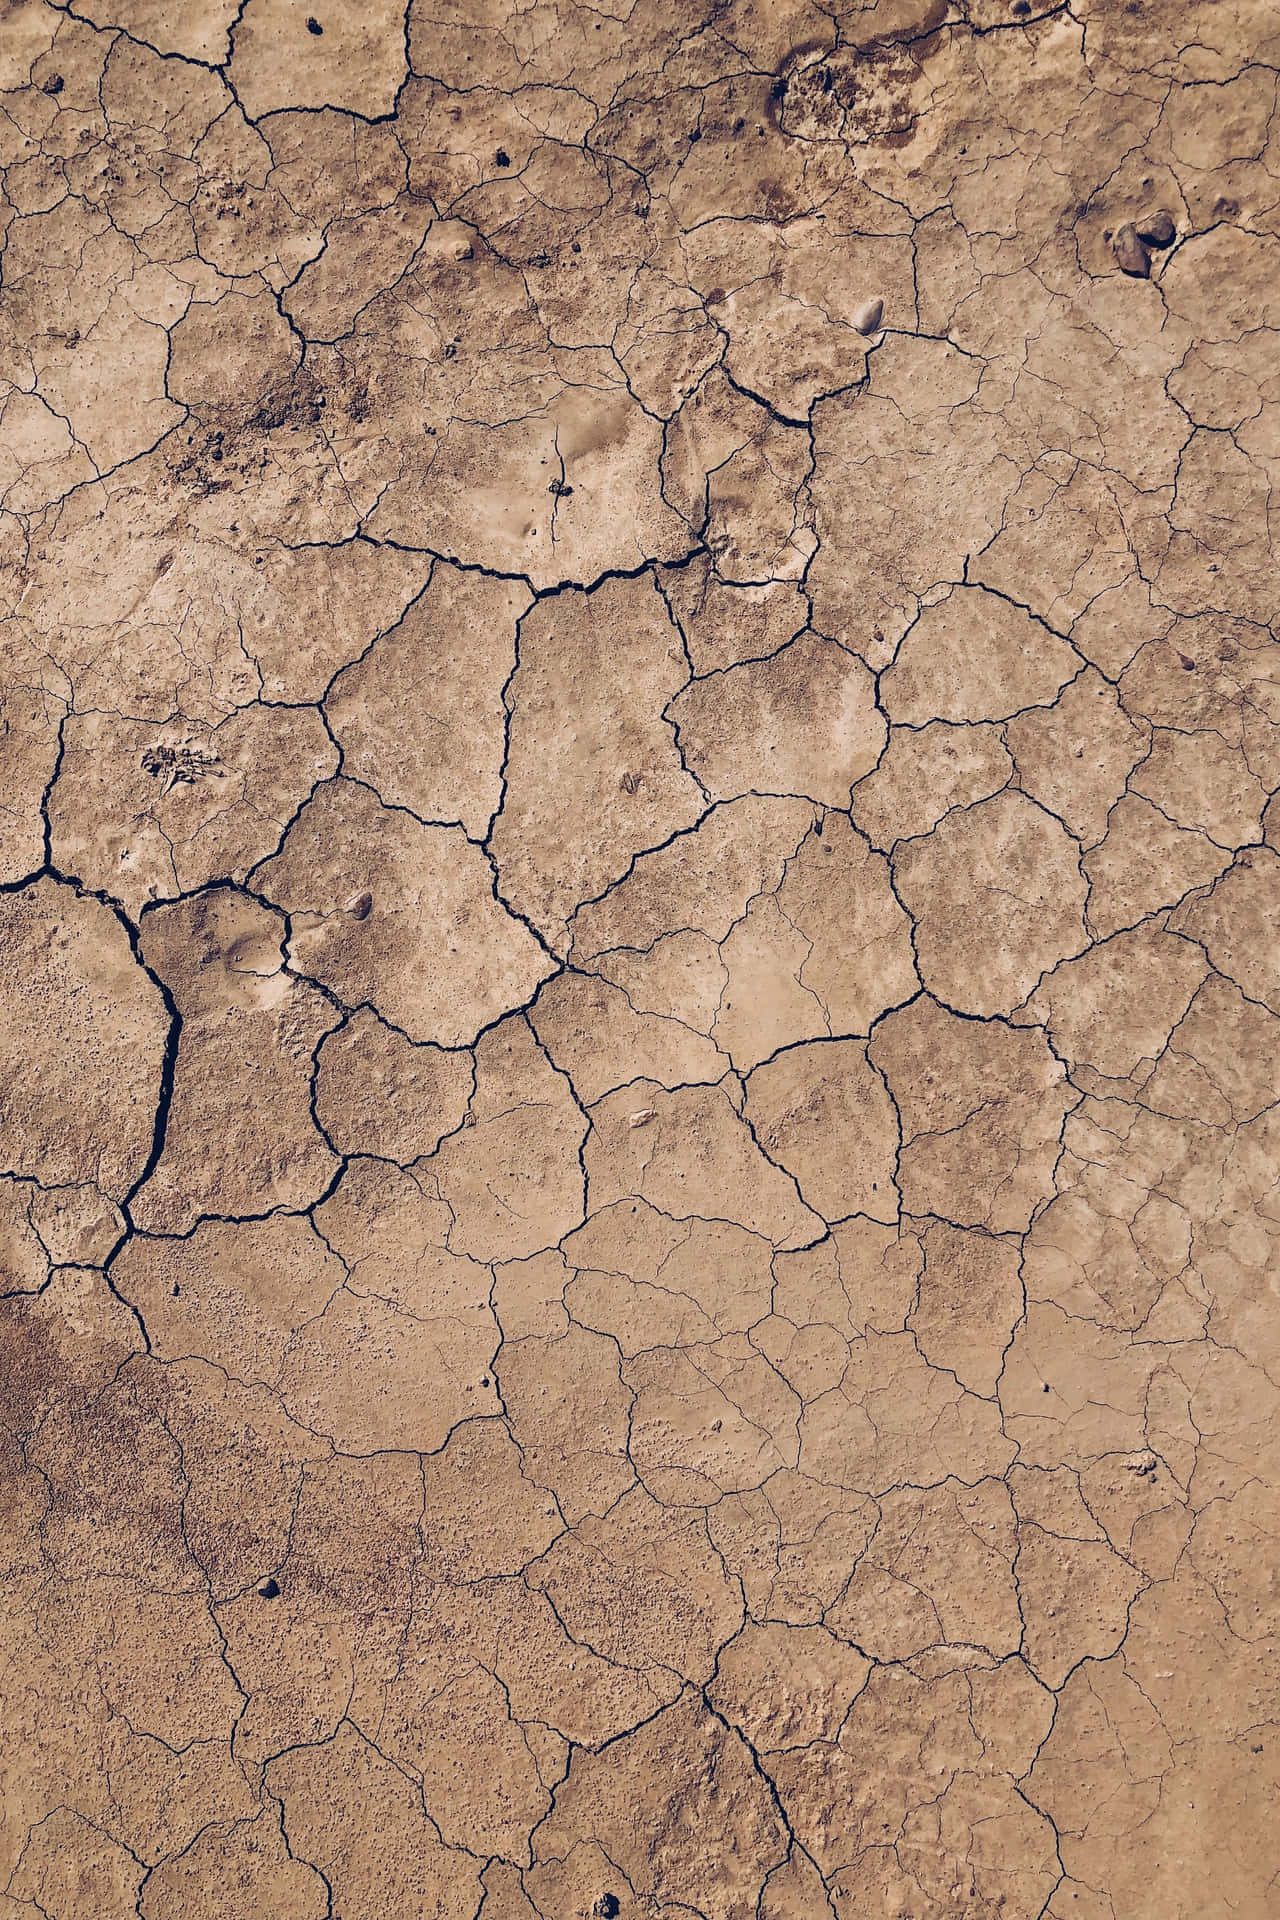 A Cracked Surface Of A Desert